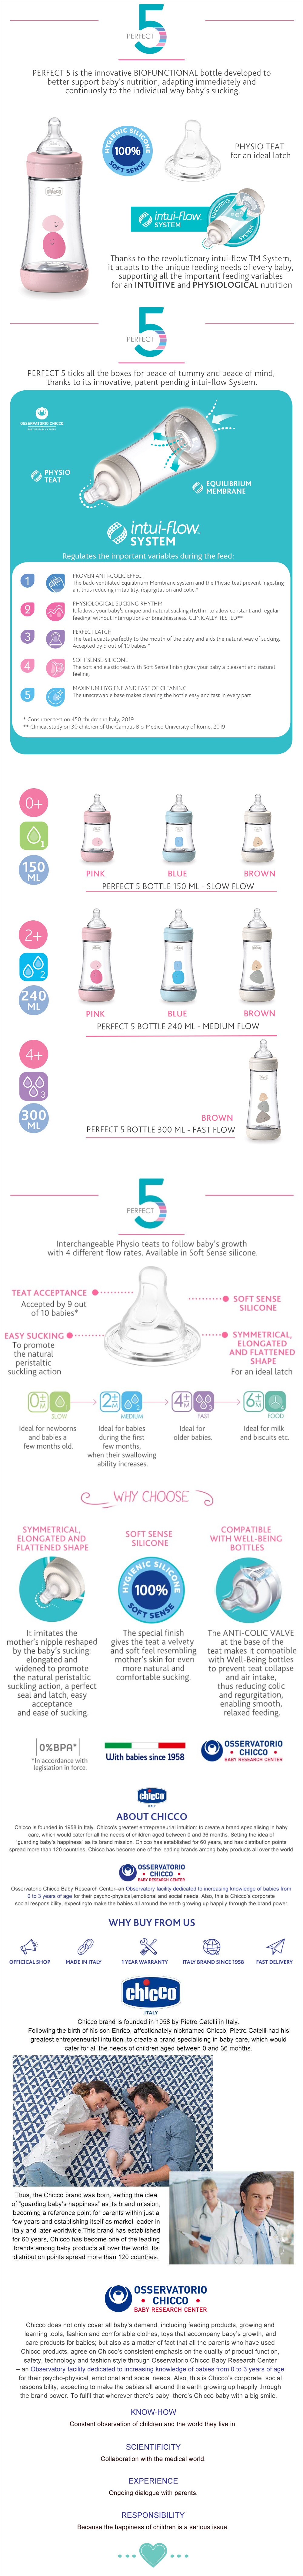 Chicco Perfect5 PP Feeding Bottle-150ml(Silicone Teat-Slow Flow Teat 0M+)